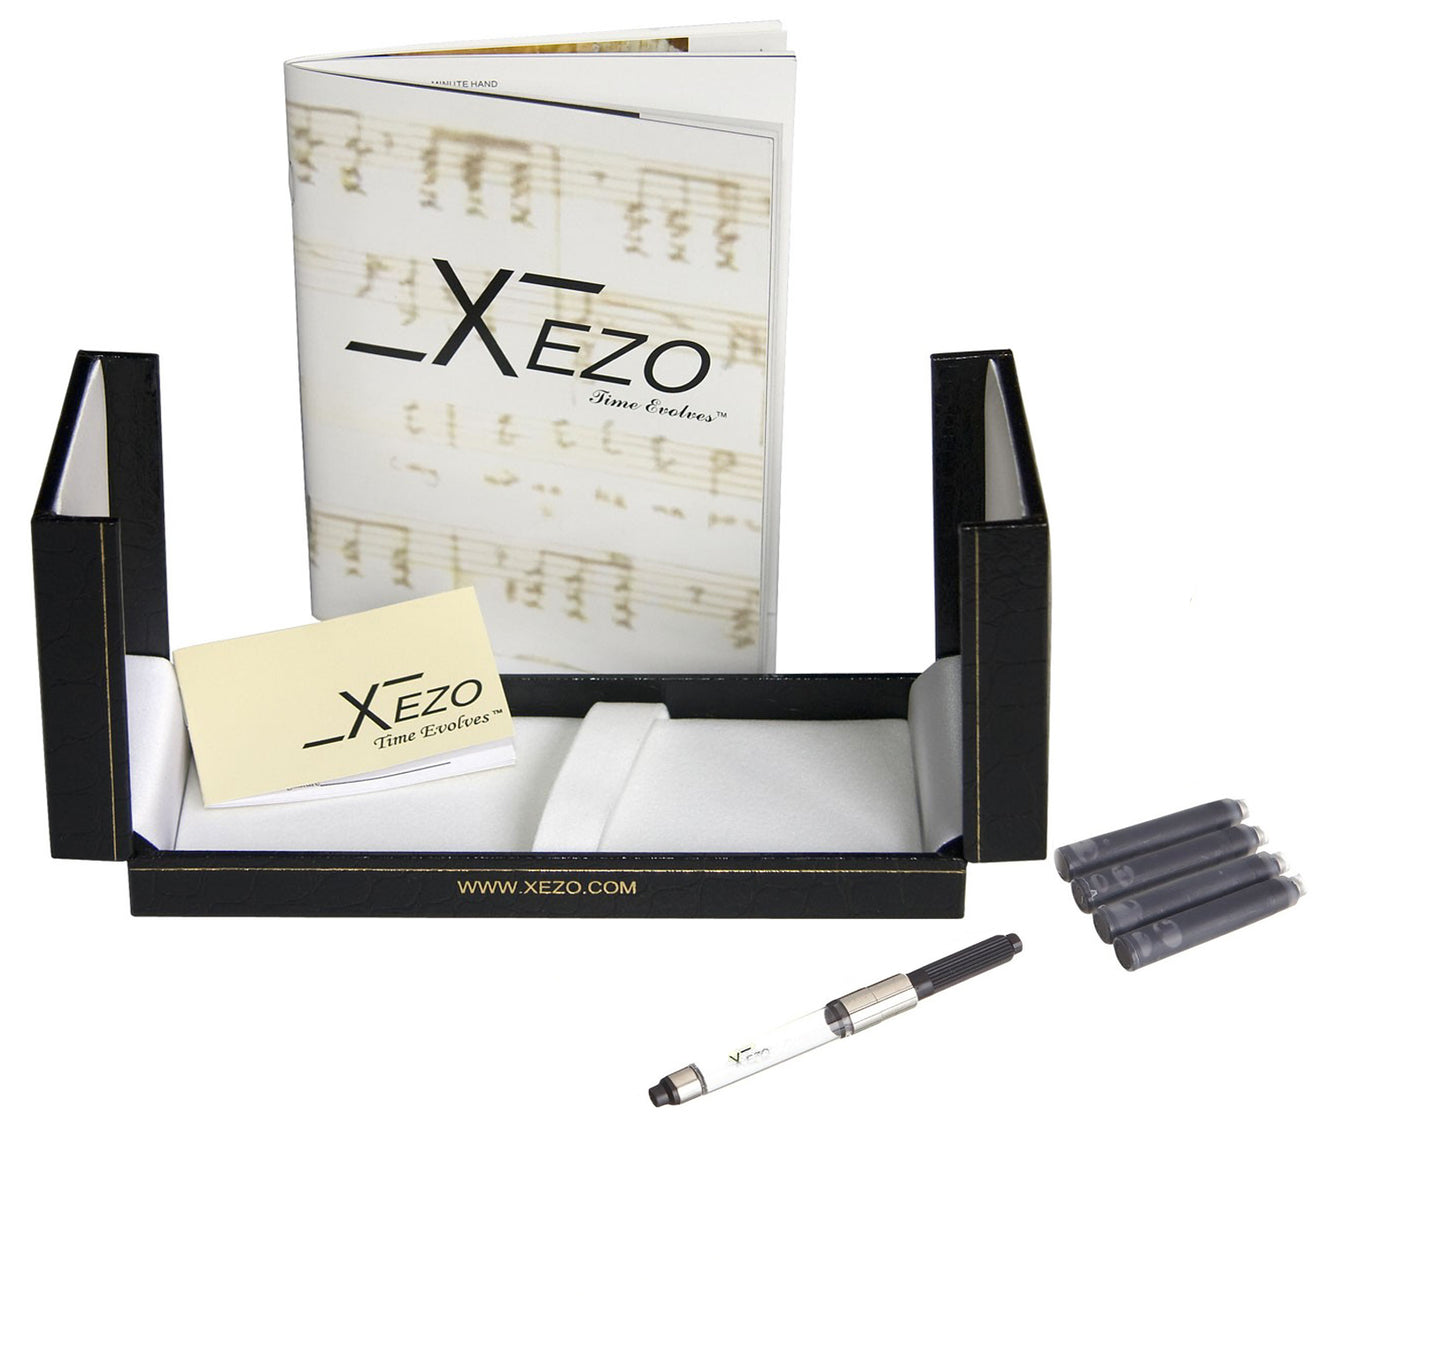 Xezo - Black gift box, certificate, manual, chrome-plated ink converter, and four ink cartridges of the Maestro Black MOP Tungsten F-PL fountain pen